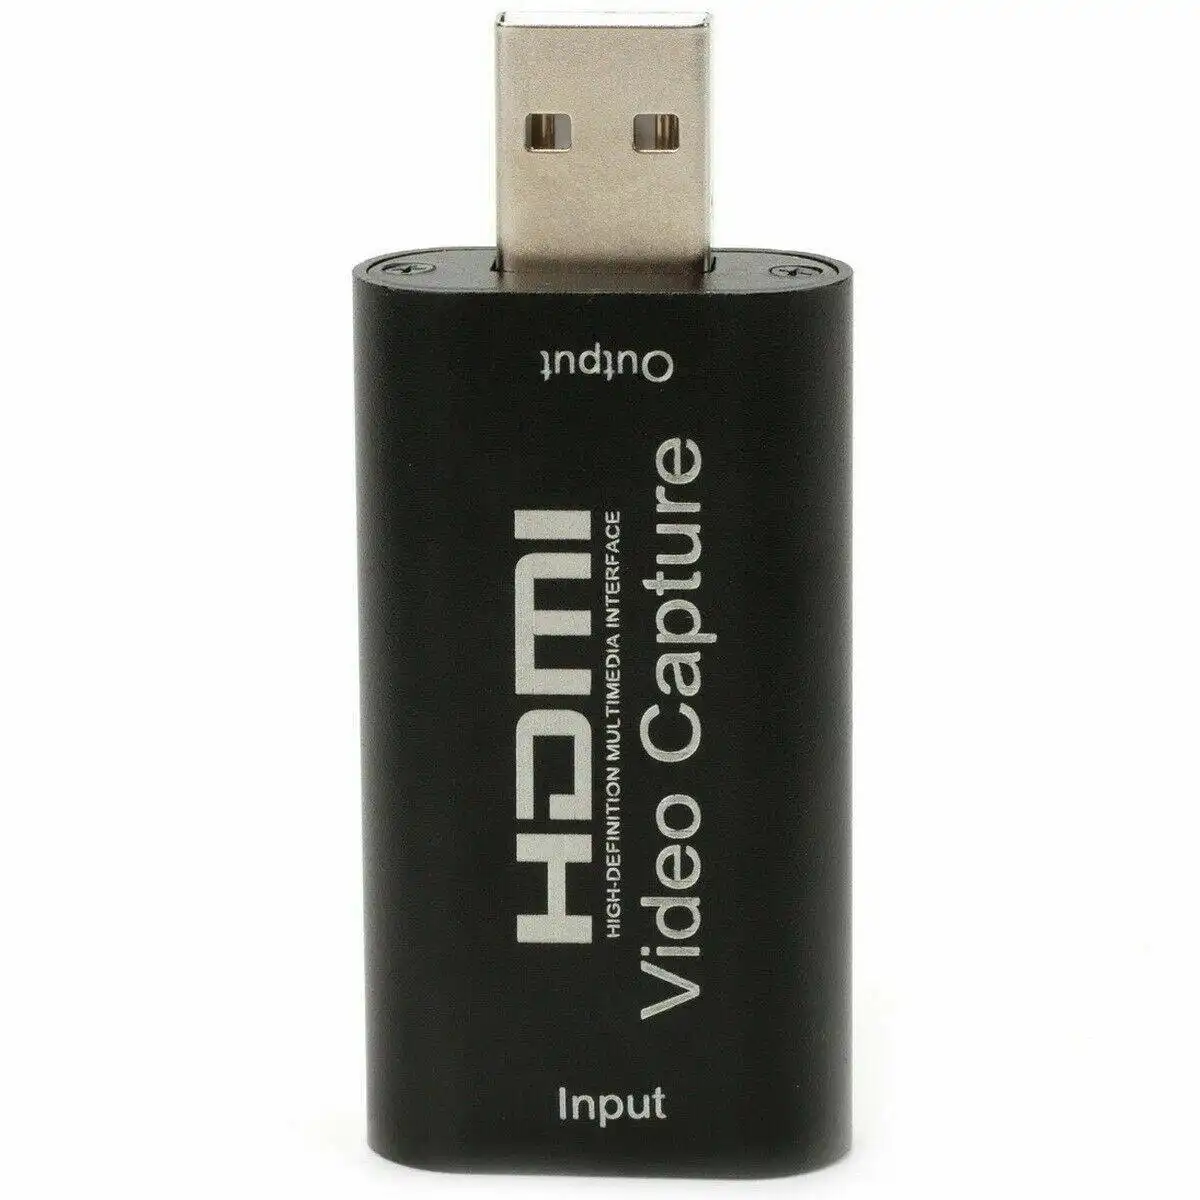 HDMI Video Capture Card USB 2.0/ HD 1080p Recorder for Game Video Live Streaming